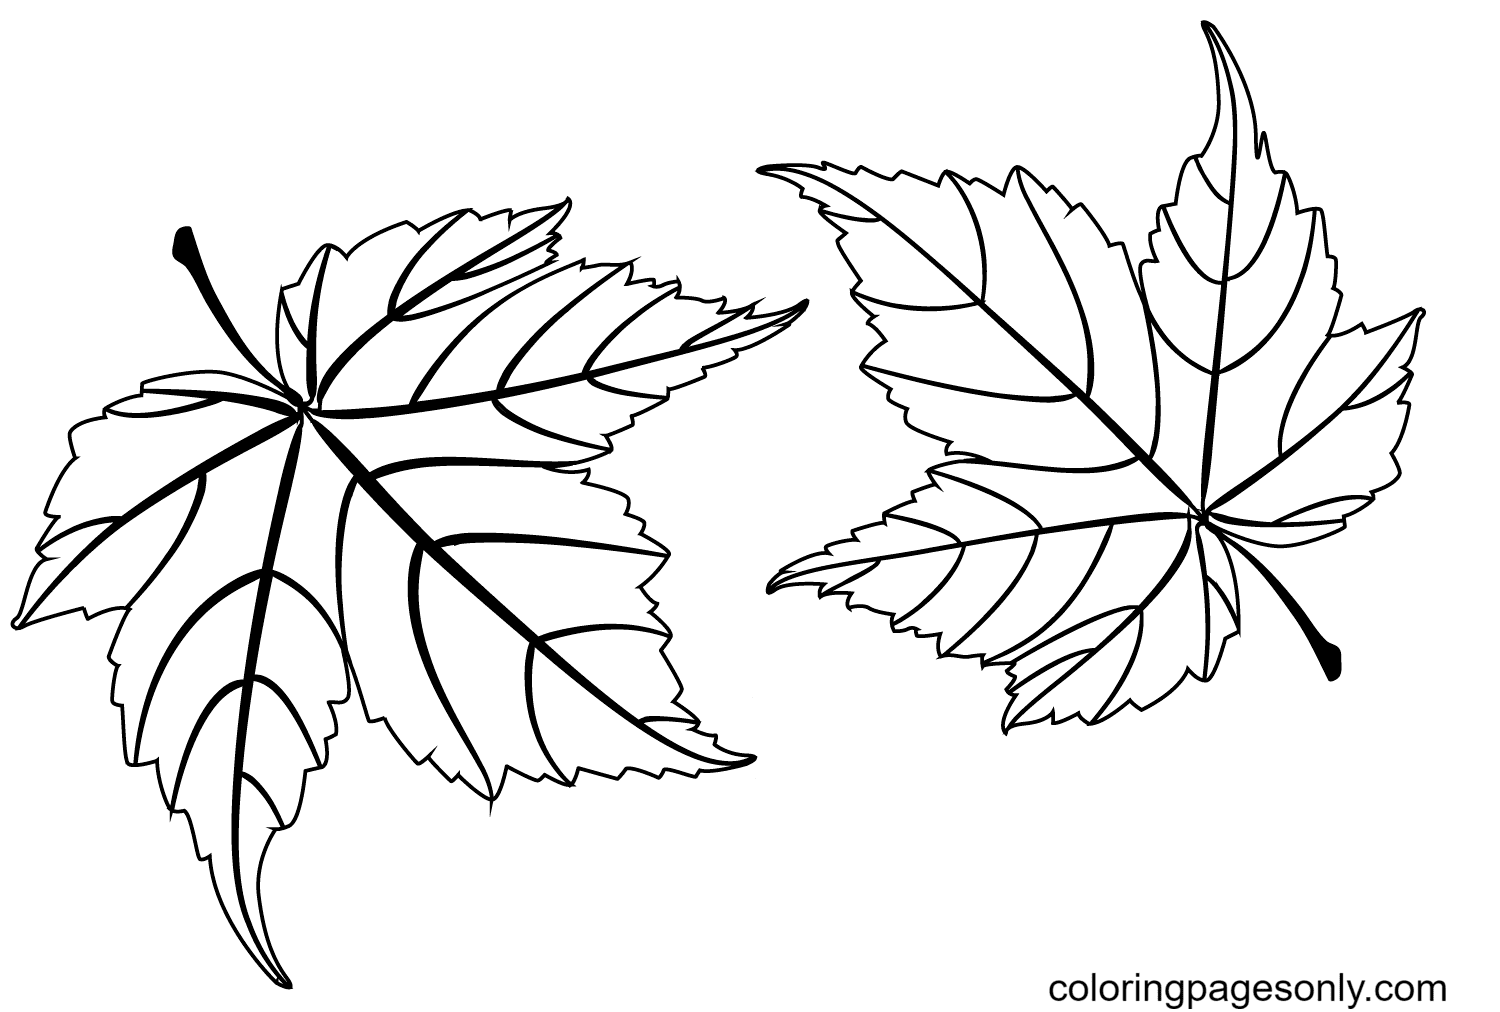 Two Maple Leaves from Autumn Leaves